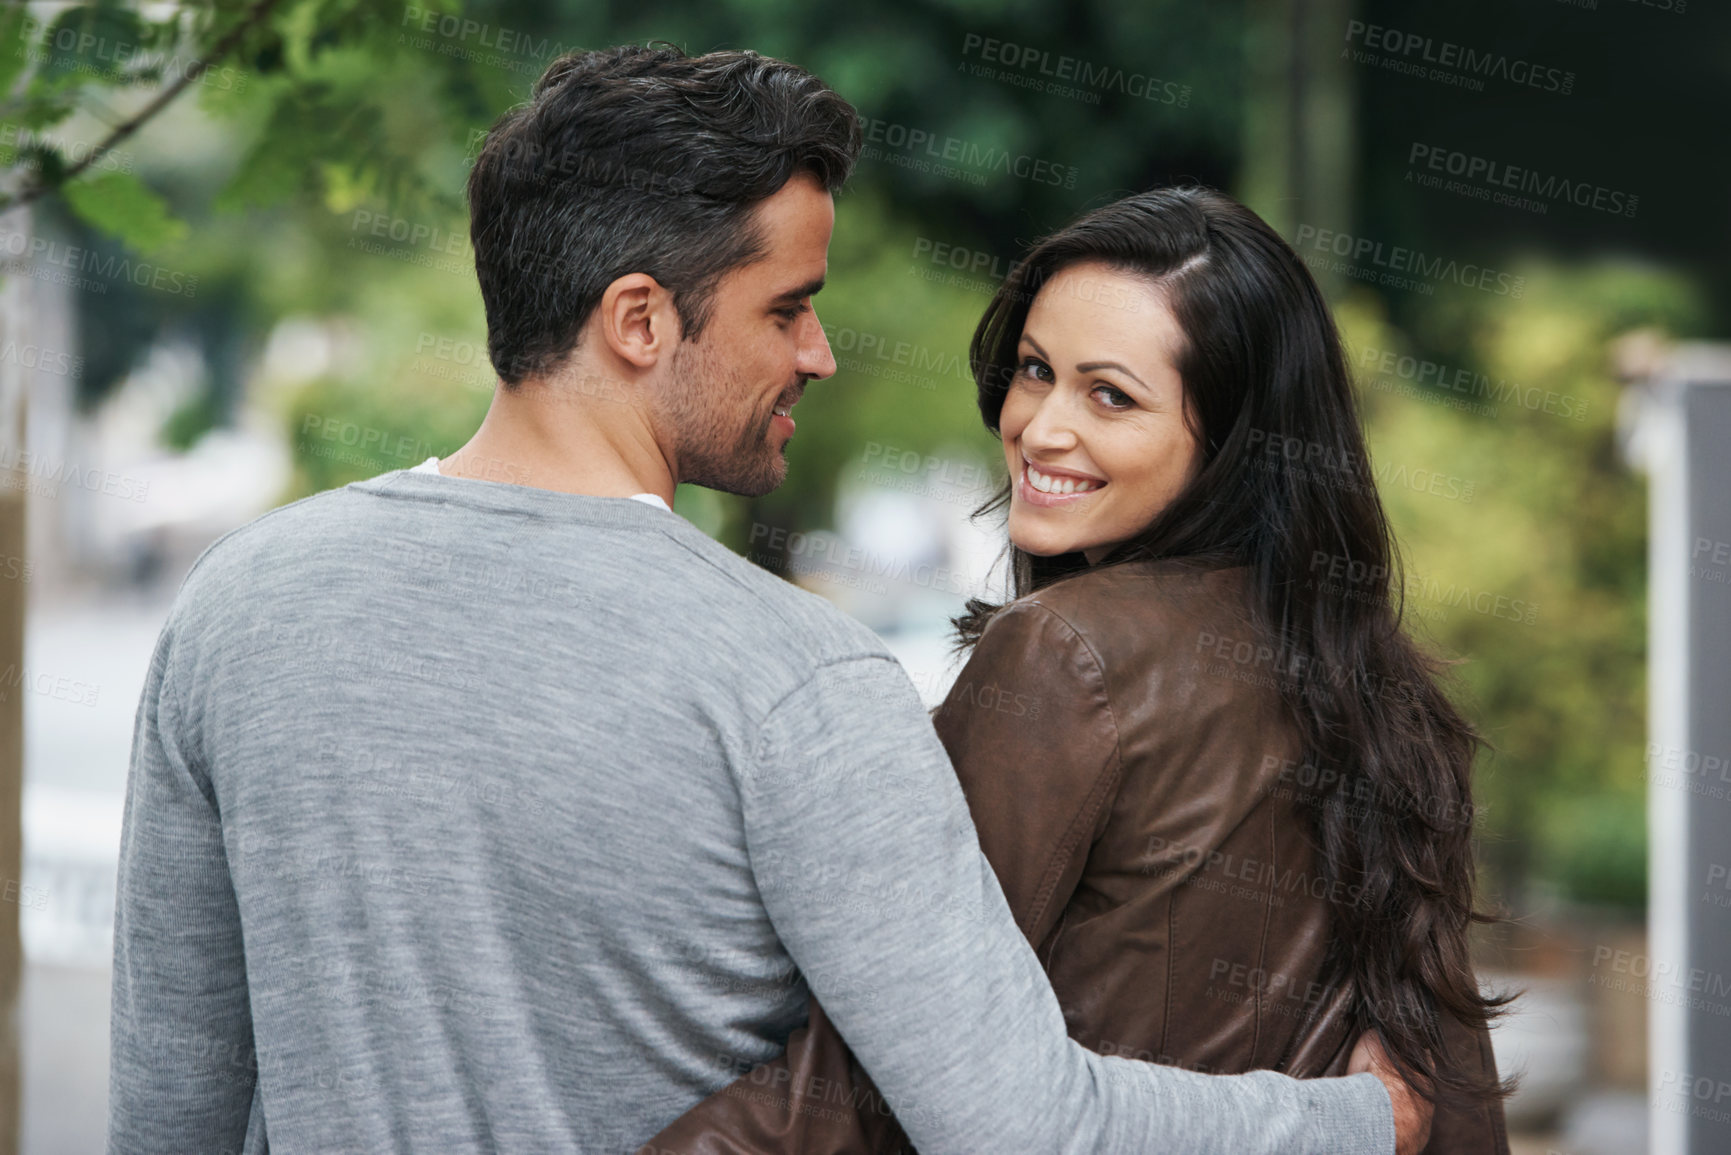 Buy stock photo Shot of an affectionate young couple walking in the street